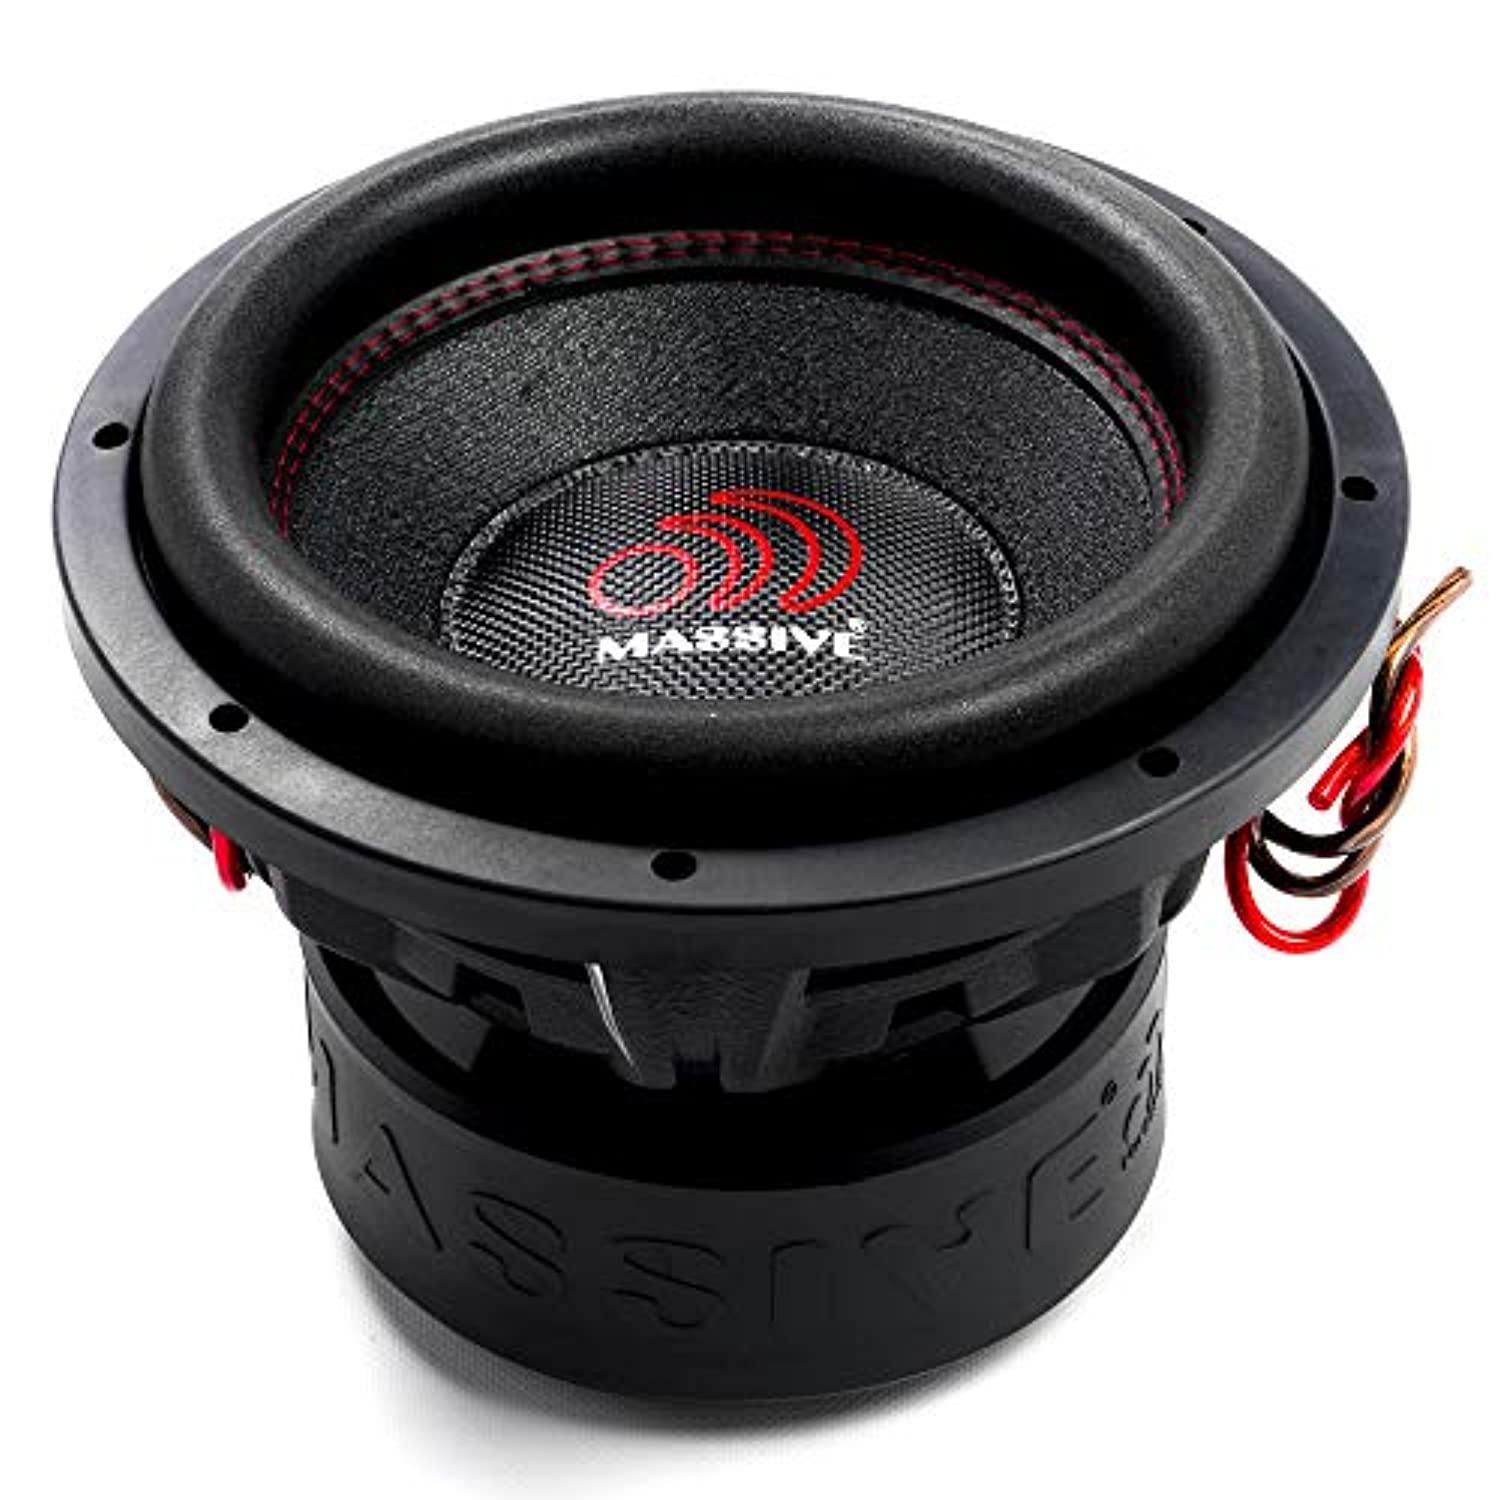 massive audio summoxl104-10 inch car audio subwoofer, high performance subwoofer for cars, trucks, jeeps - 10" subwoofer 1500